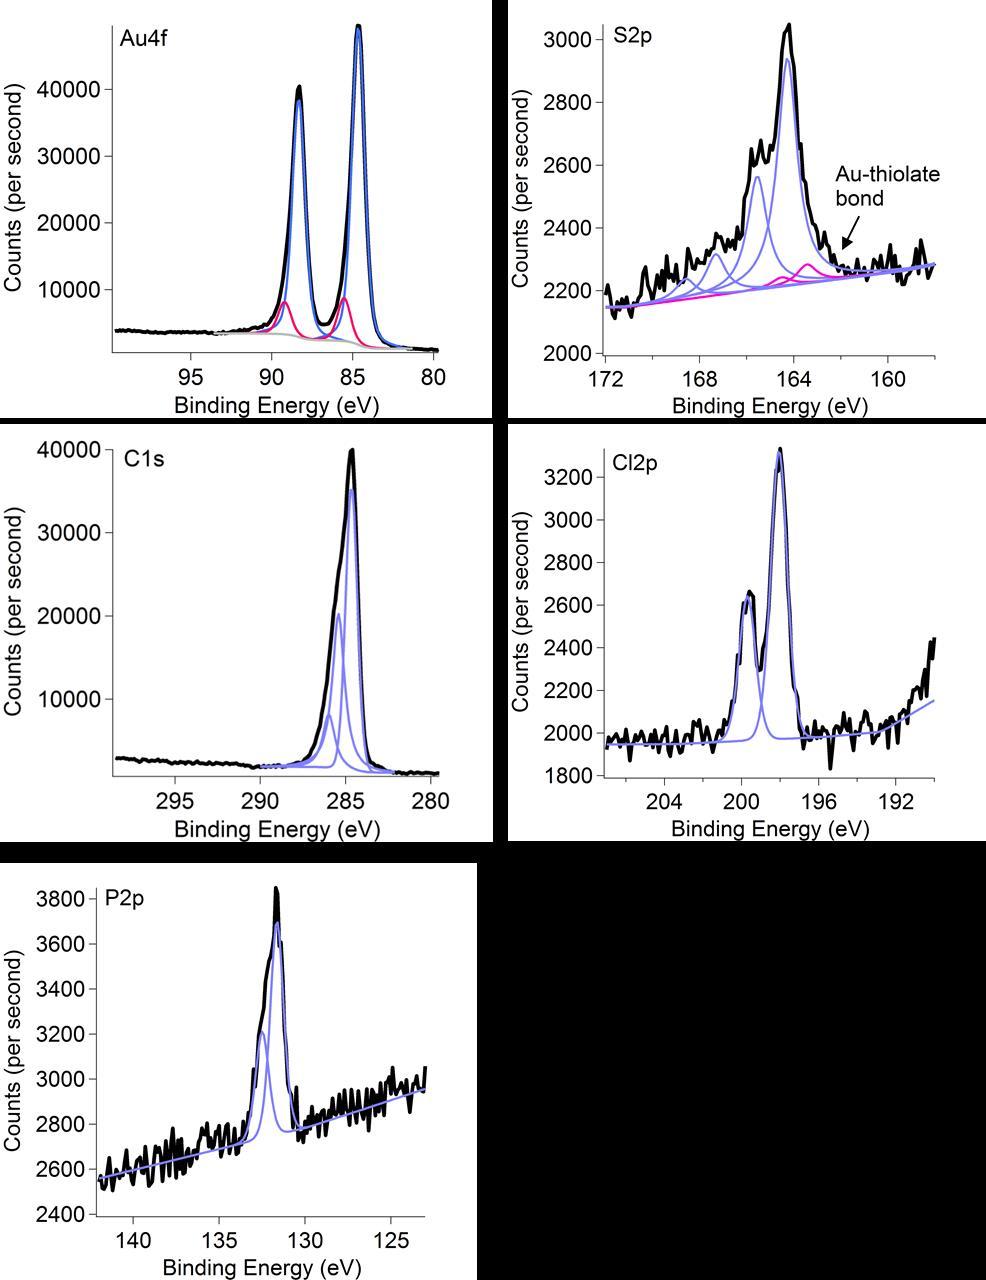 Figure S13. XPS elemental spectra (Au4f, S2p, C1s, P2p, and Cl2p) of TPP-Au 11 - UDT, black trace is the experimental data and the other colored traces show the peak fitting. The main S2p peak at 164.